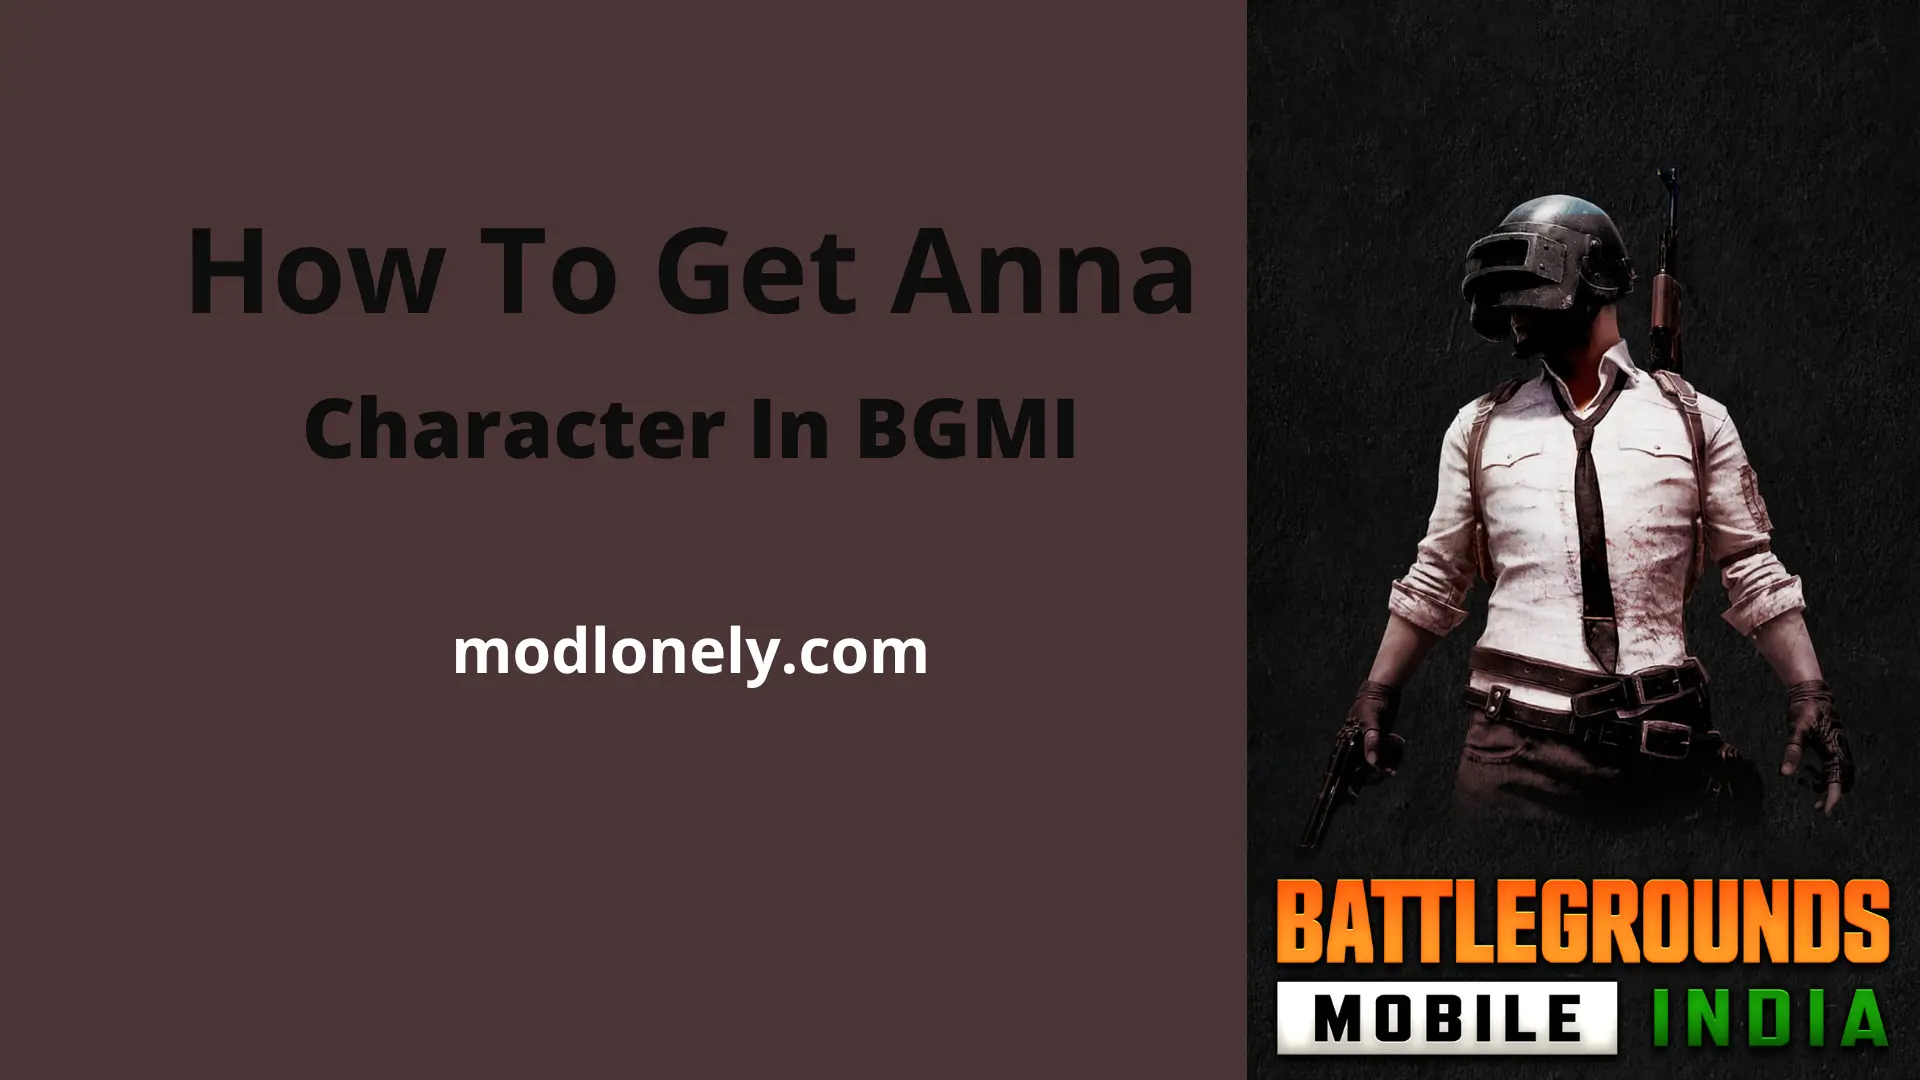 Anna Character in BGMI